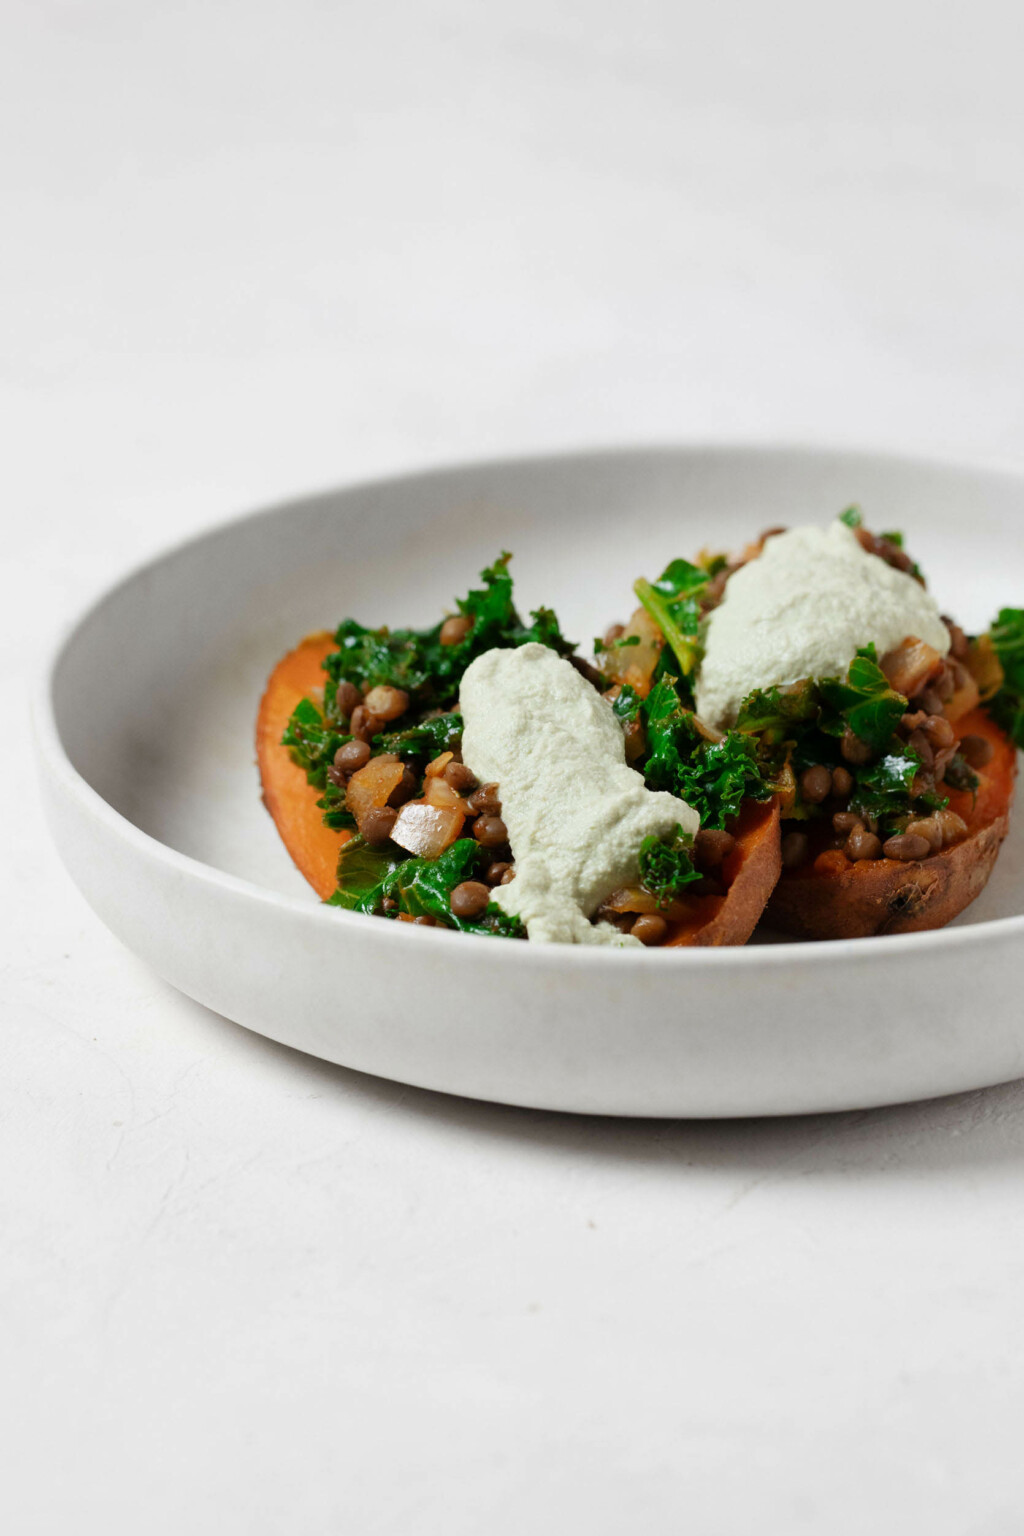 An image of two kale and lentil stuffed sweet potatoes, which are being served in a shallow, white ceramic bowl.